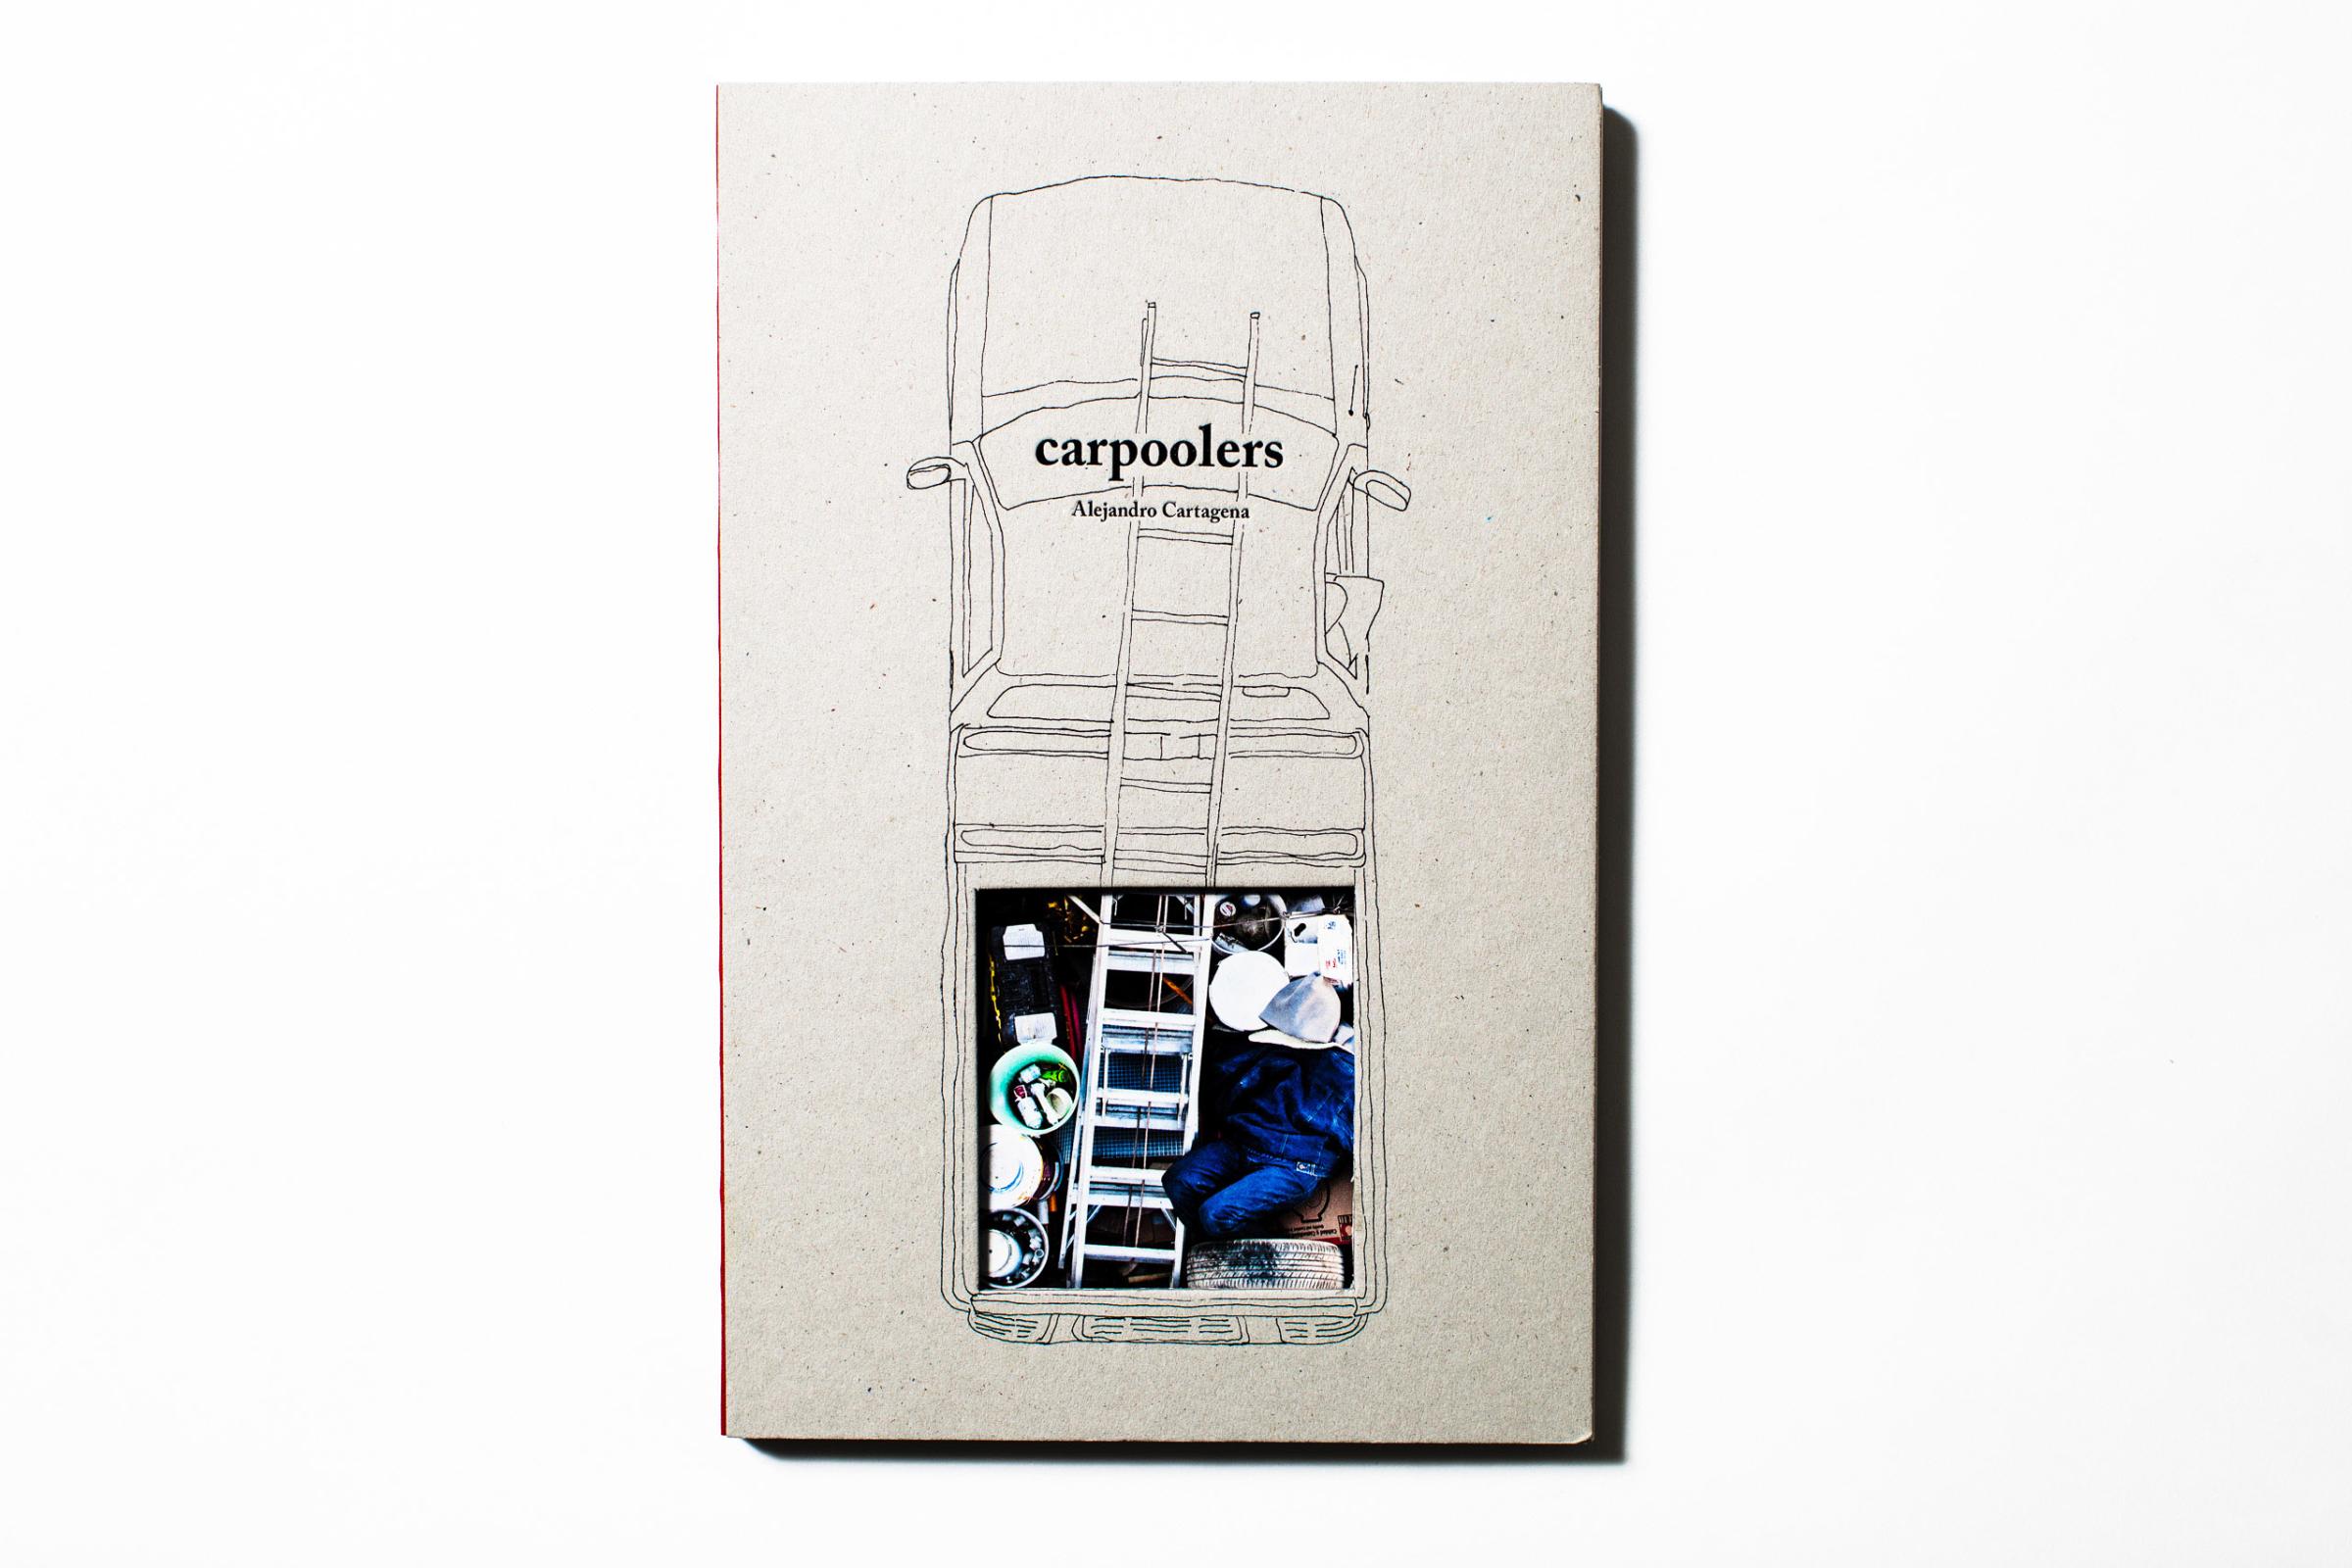 Car poolers byAlejandro Cartagena, self-published, selected by Martin Parr, Photographer at Magnum Photos.